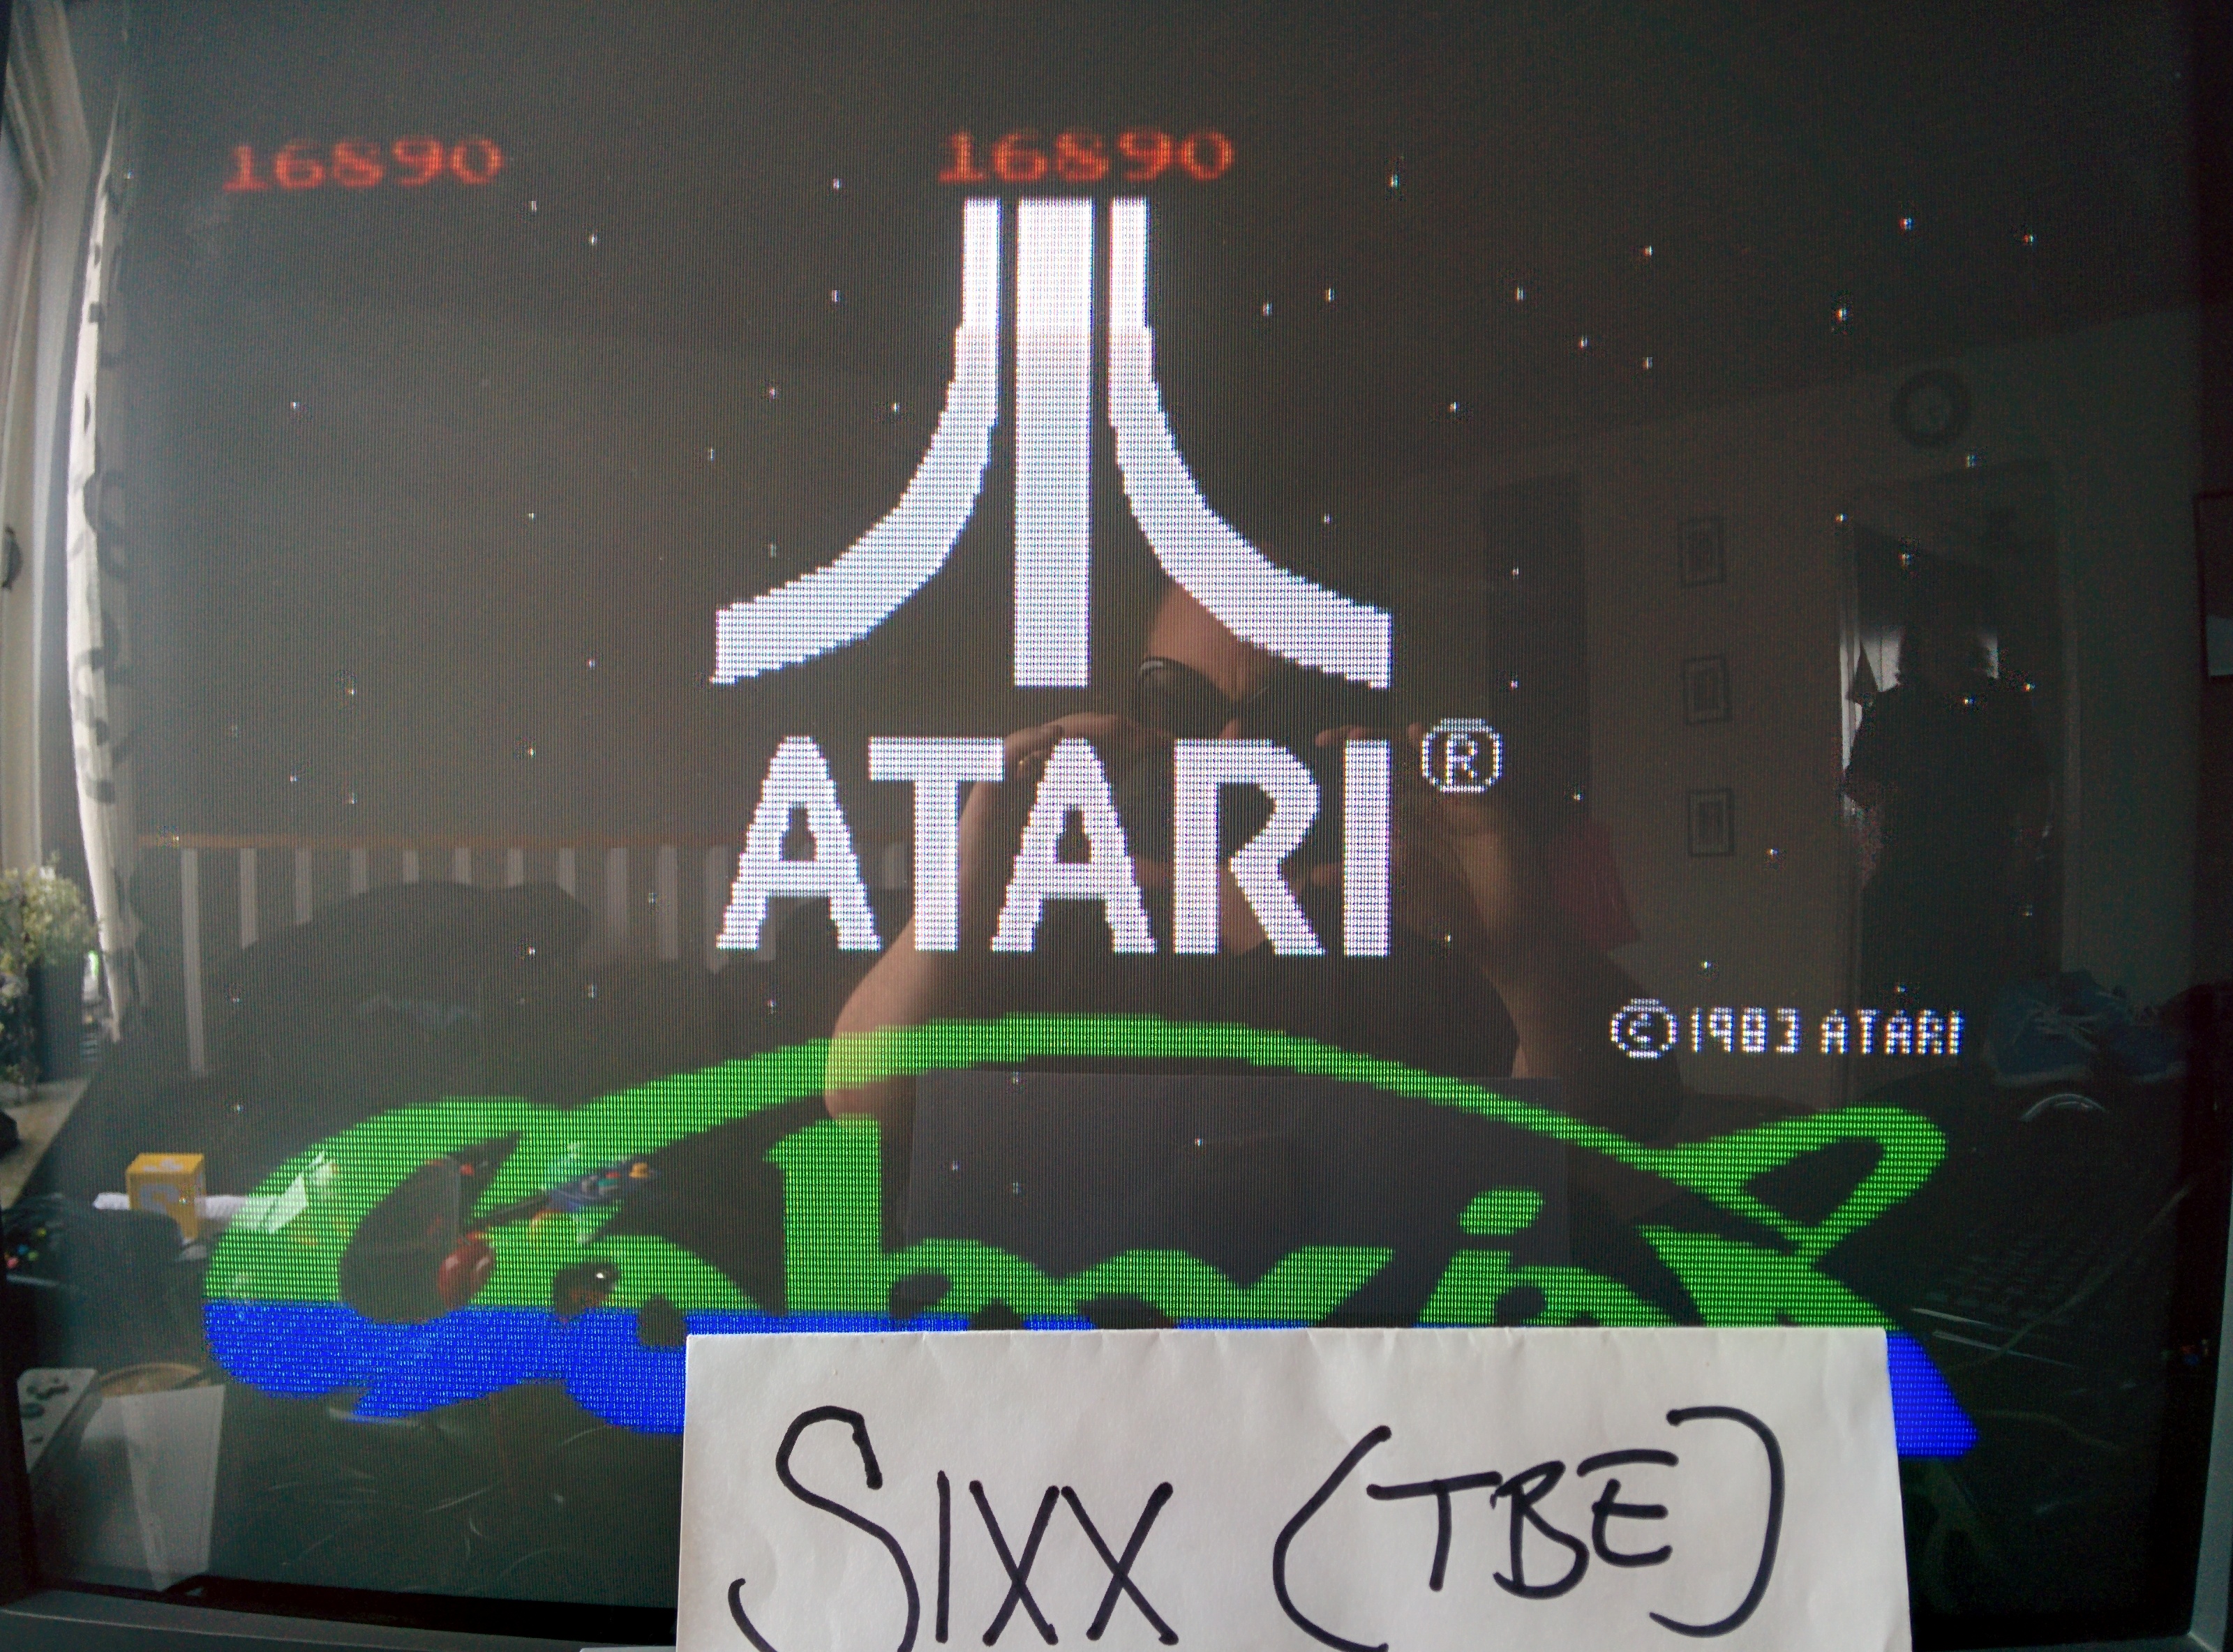 Sixx: Galaxian: Novice (Colecovision Emulated) 16,890 points on 2014-05-09 01:37:34